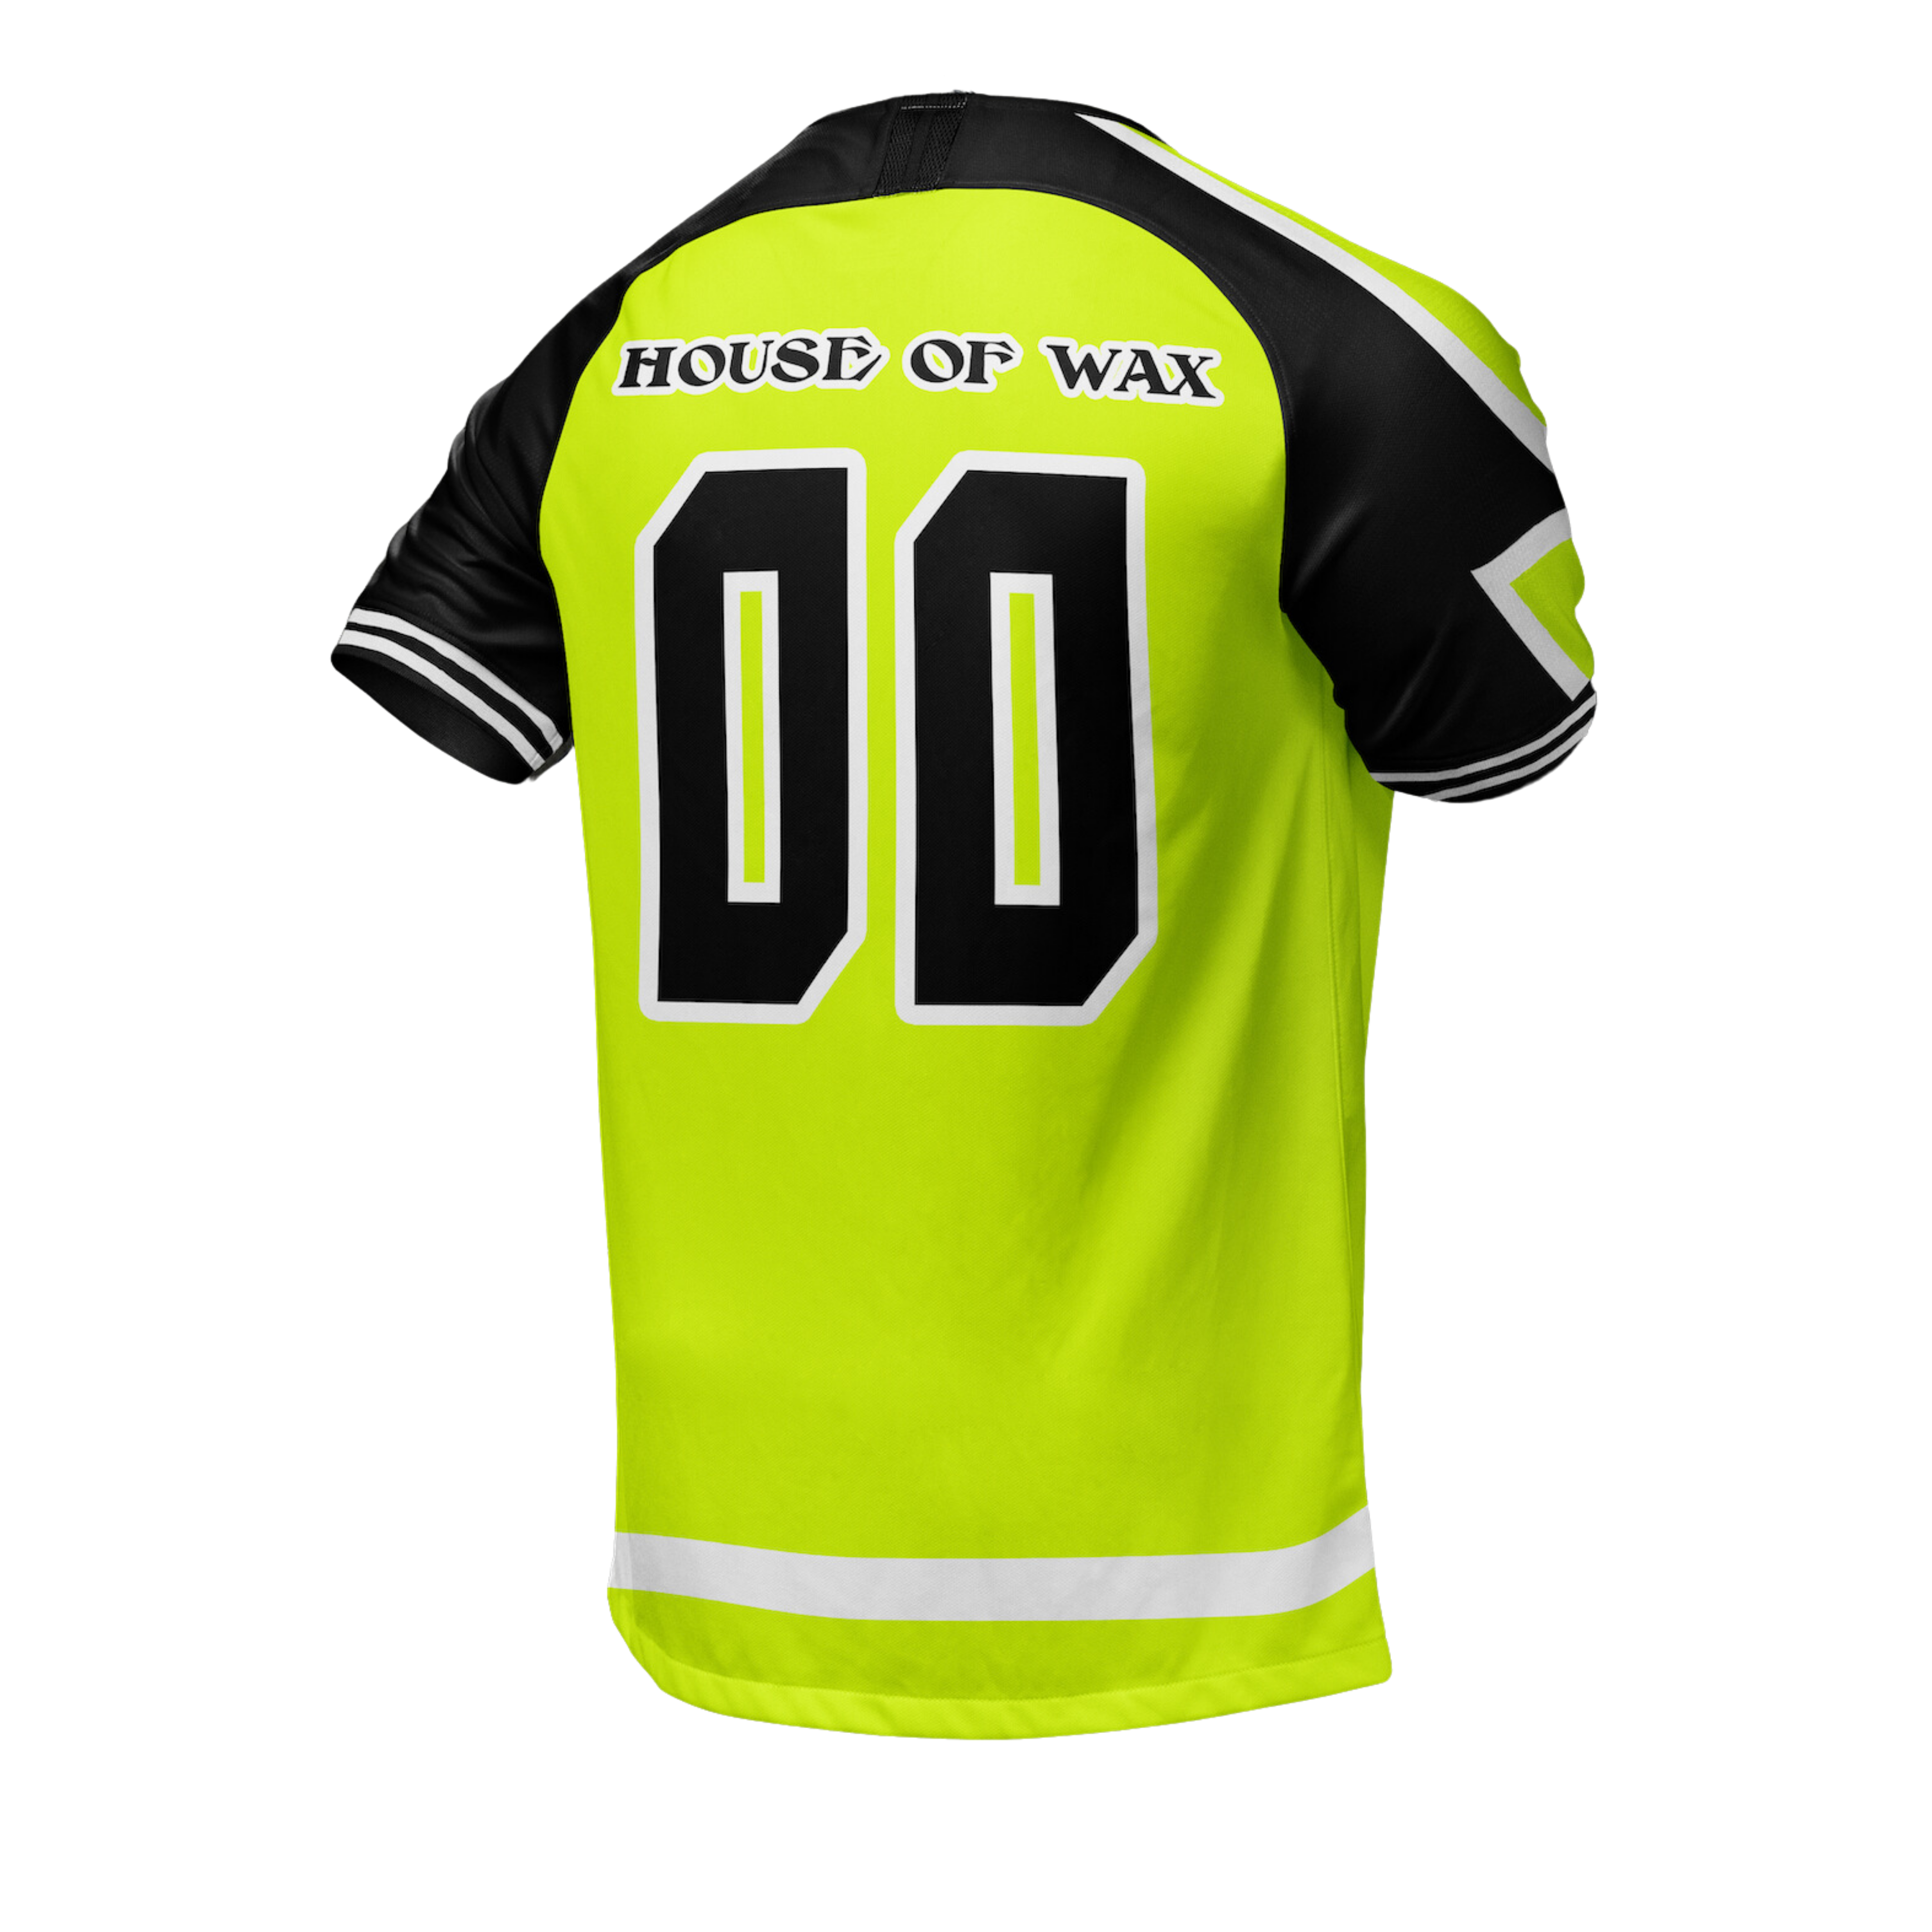 HOUSE OF WAX SOCCER JERSEY